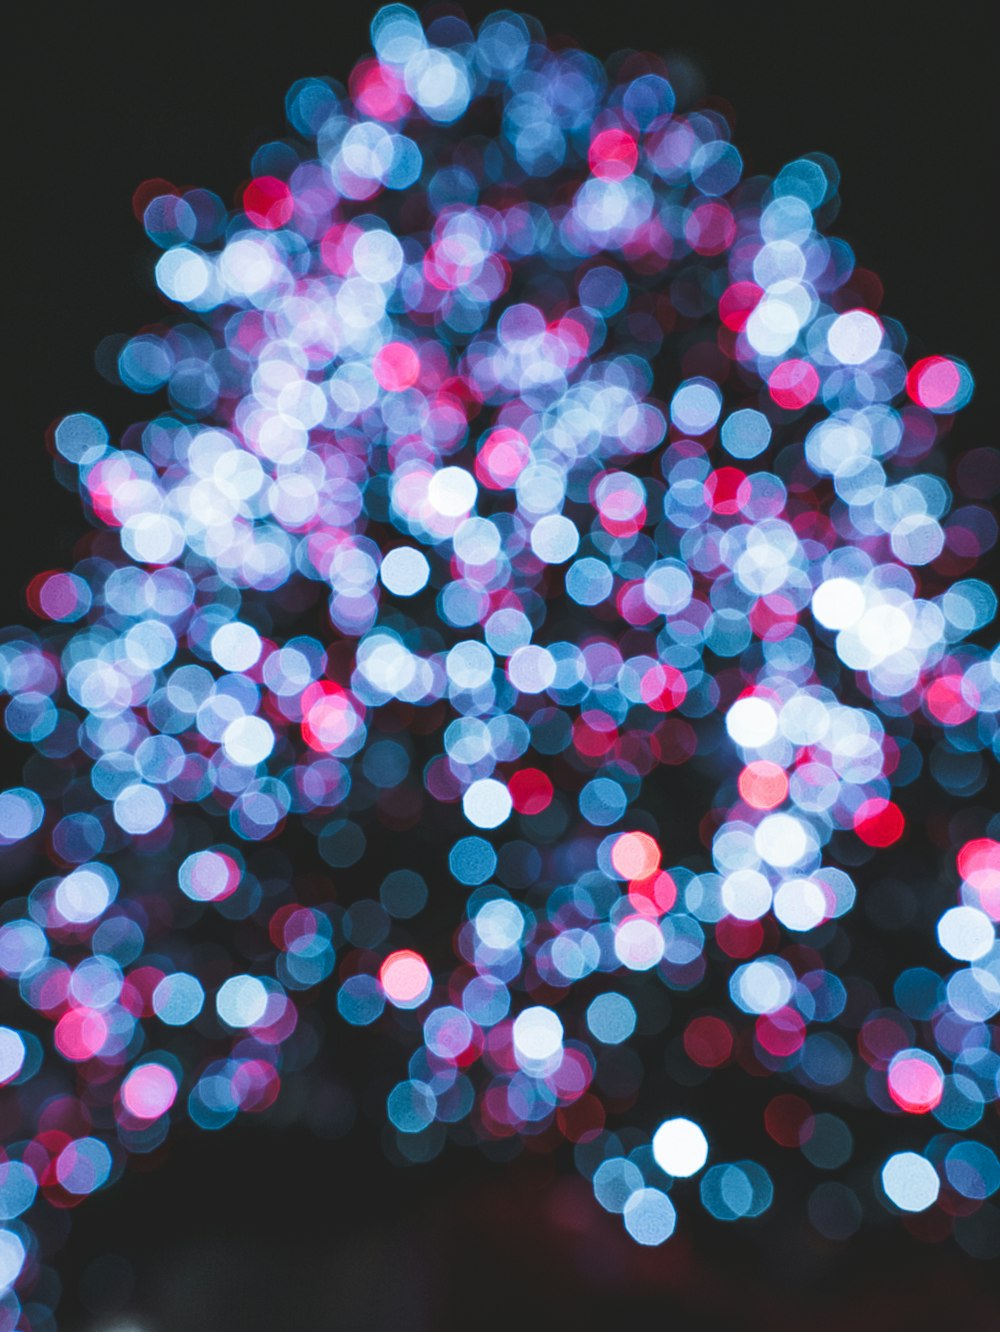 30,000+ Glowing Light Pictures | Download Free Images on Unsplash